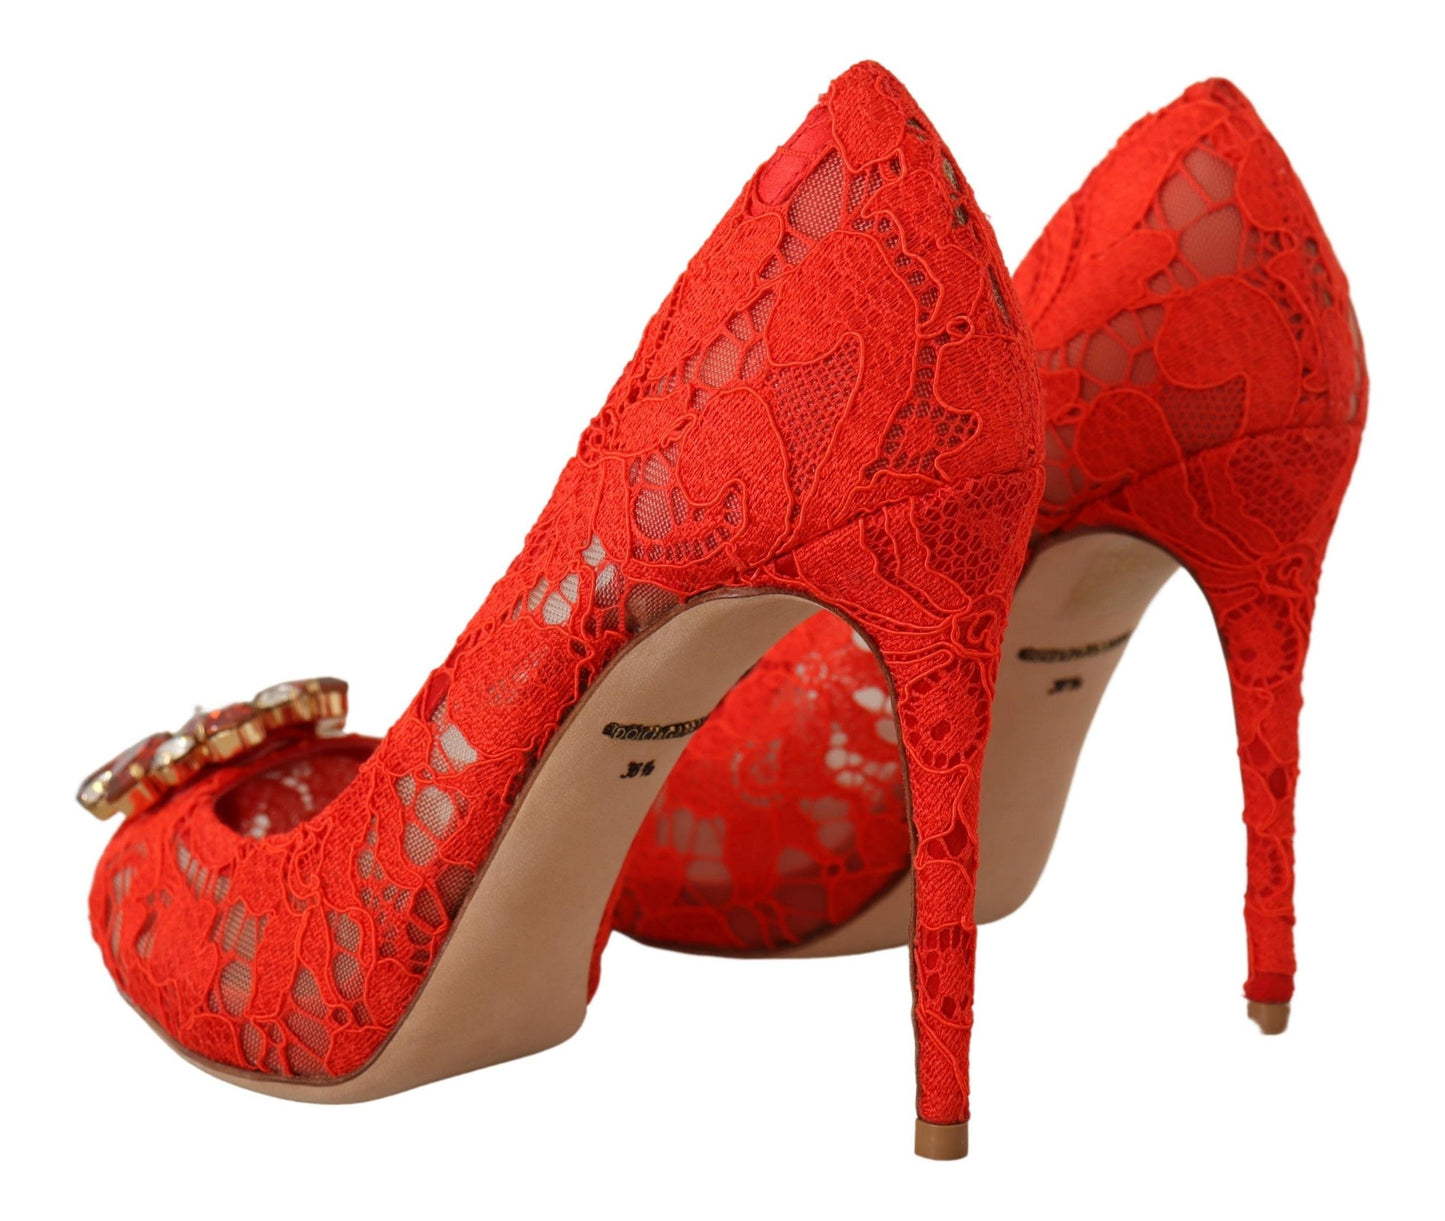 Dolce & Gabbana Red Taormina Lace Crystal Heels Pompes